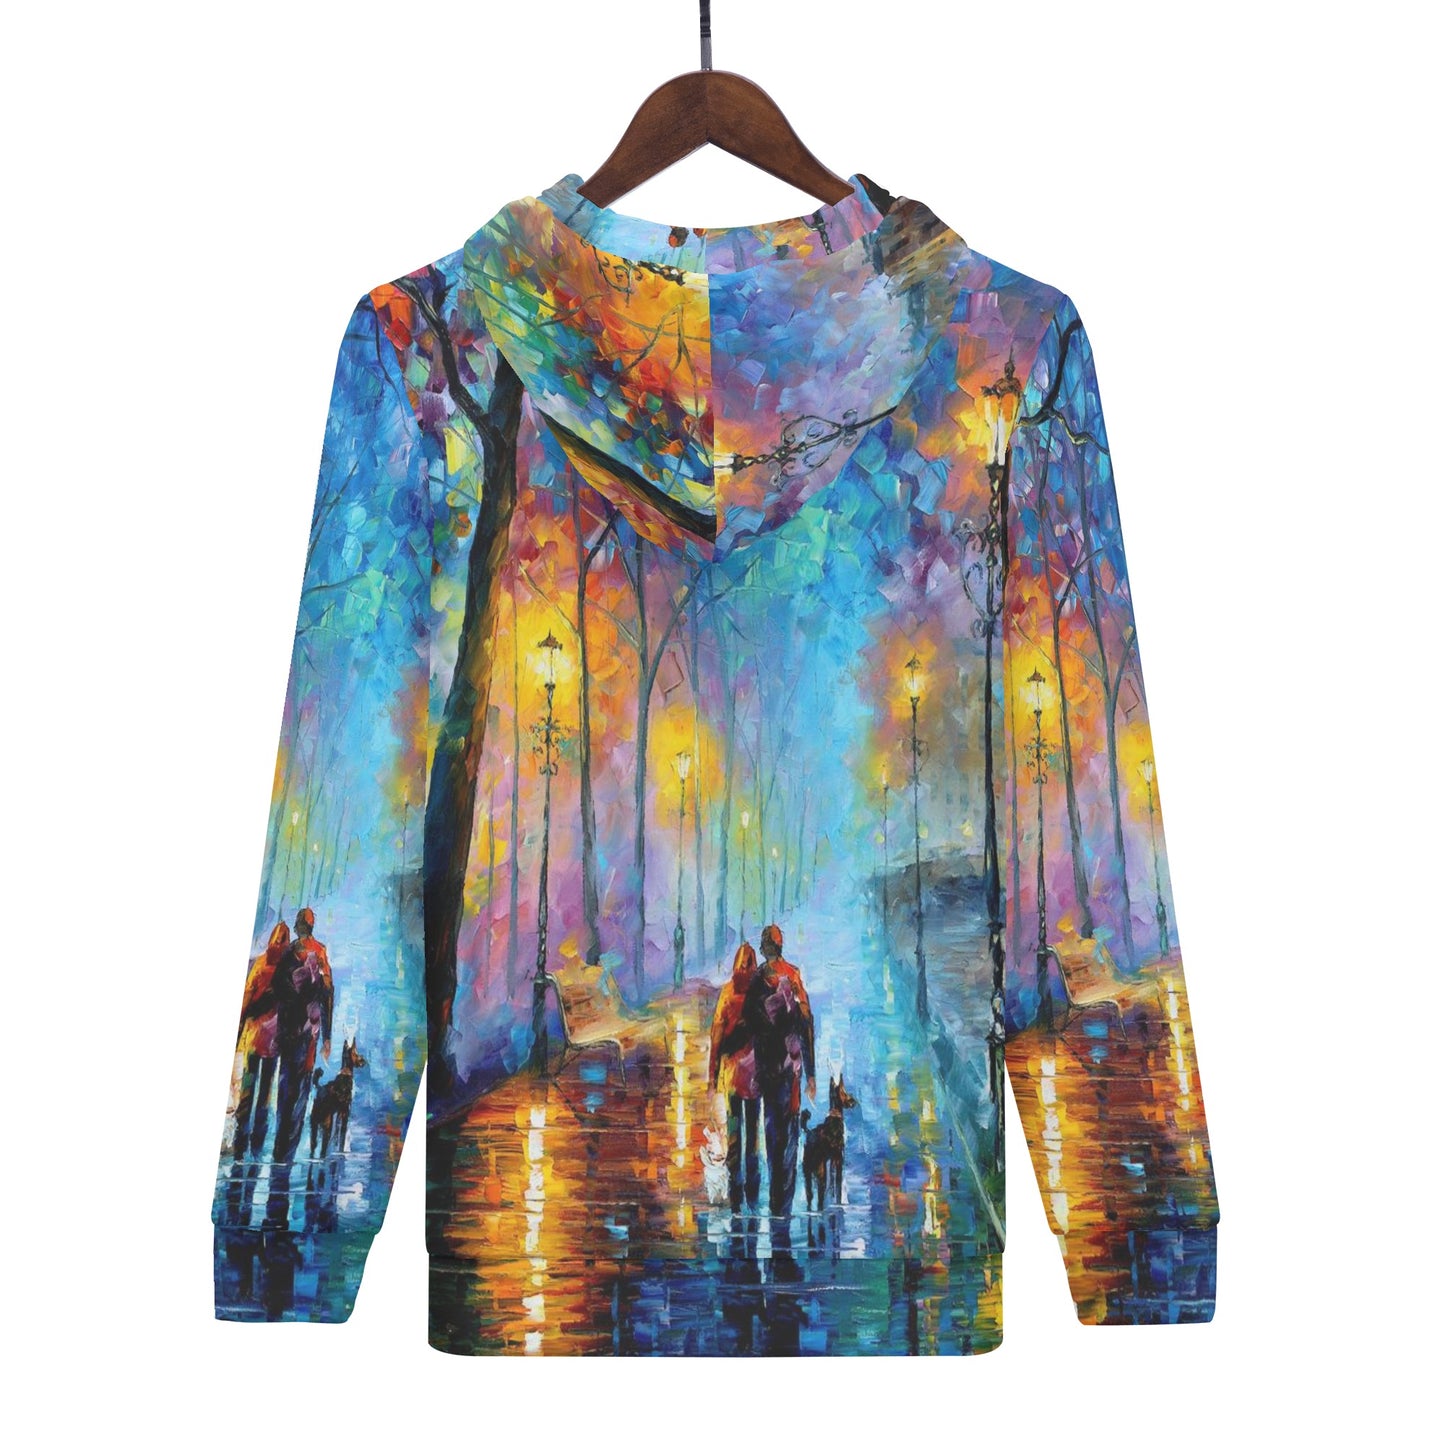 MElody of the Night Men's All Over Print Zip Hoodie